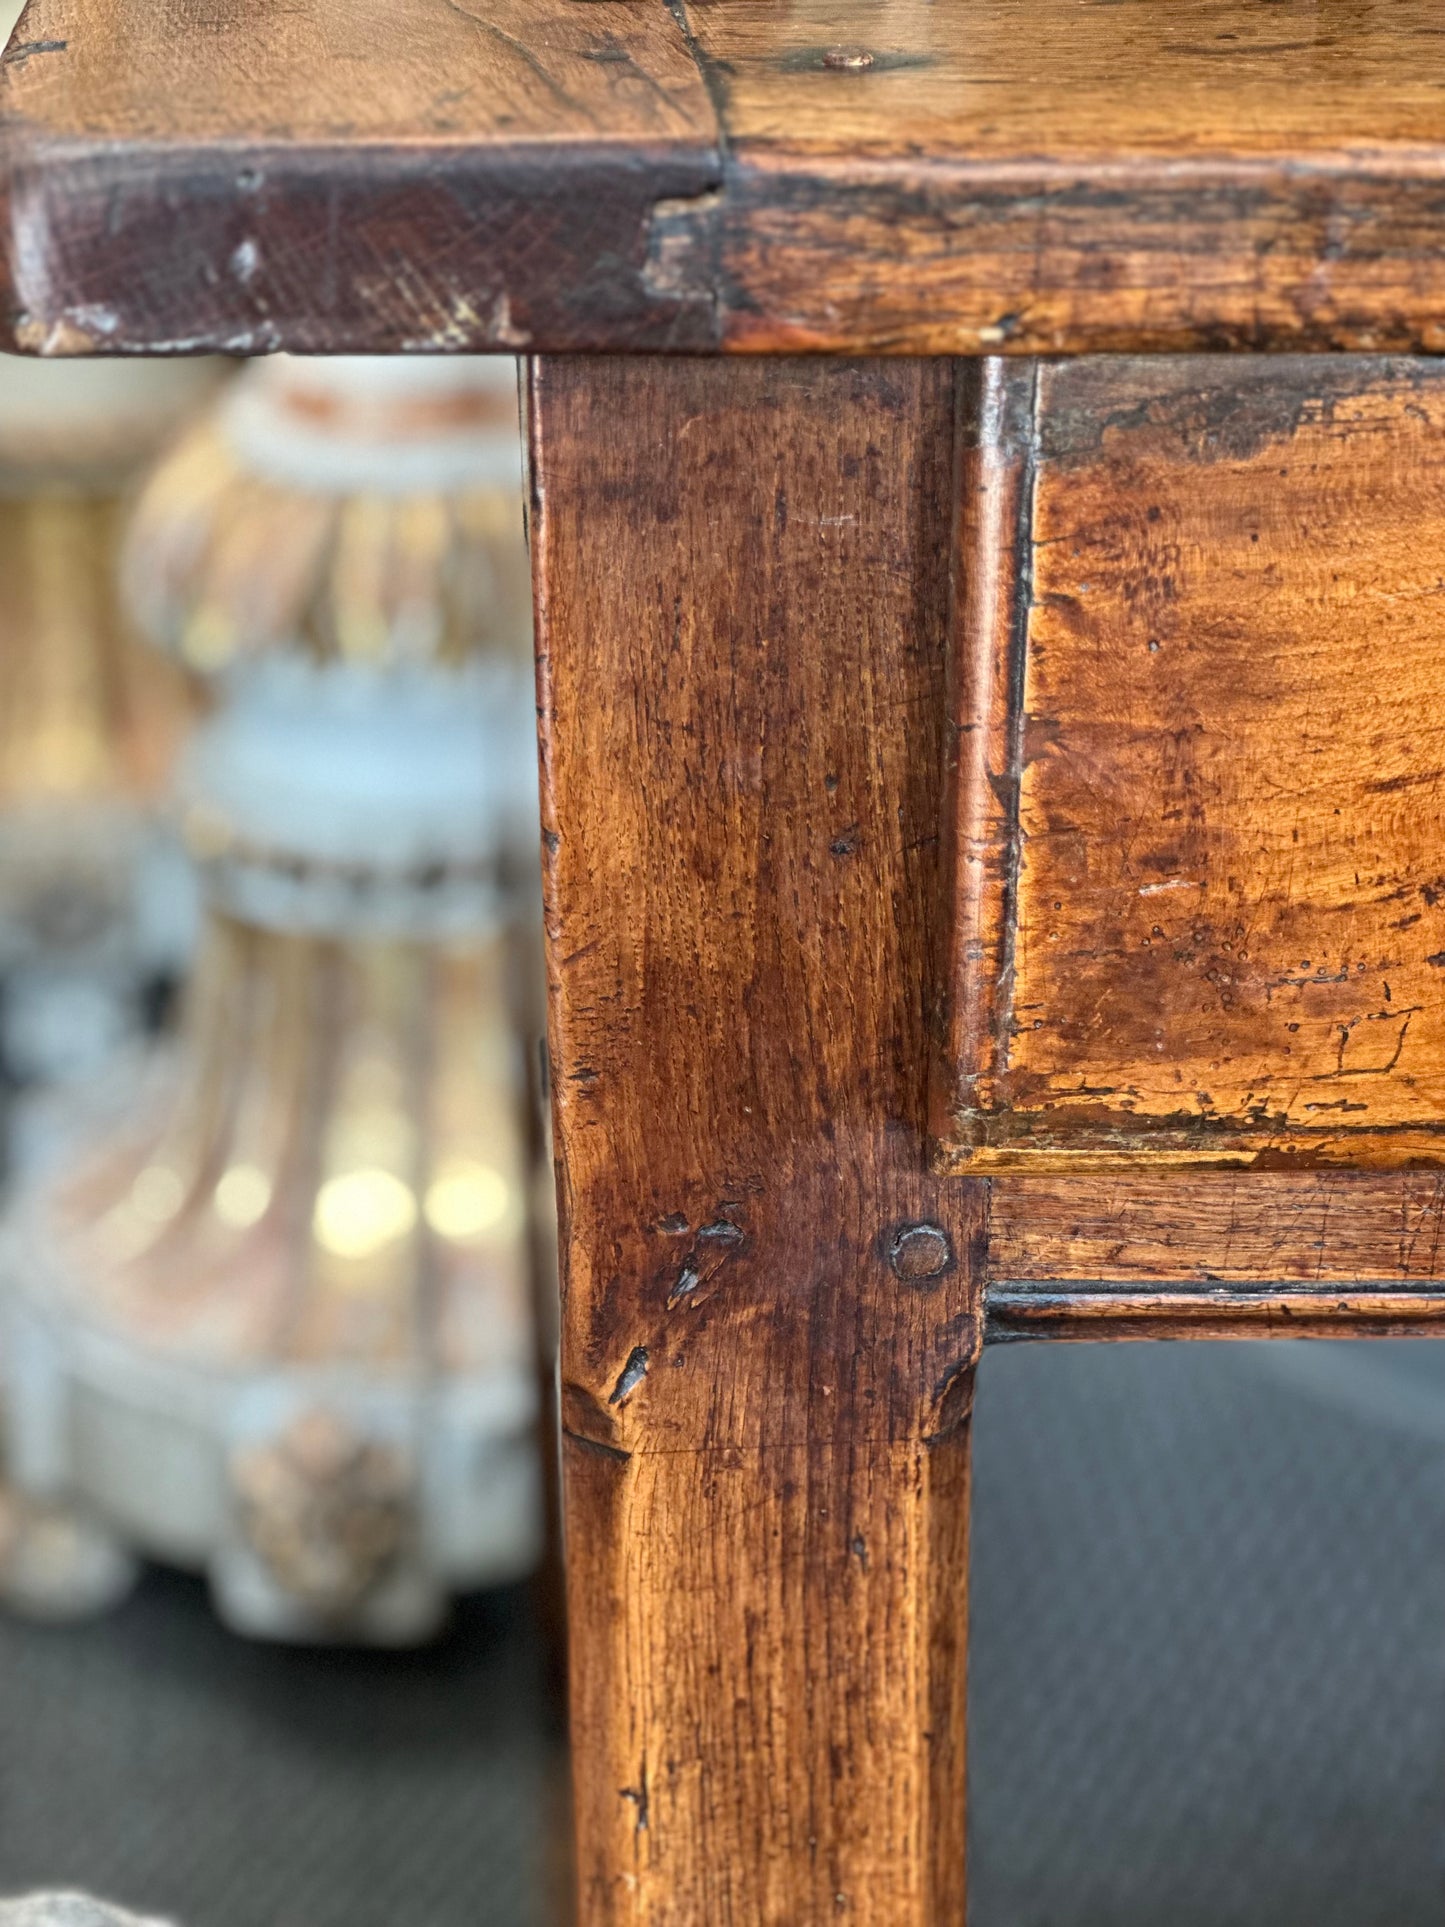 French Walnut Refectory Table - Early 1800s